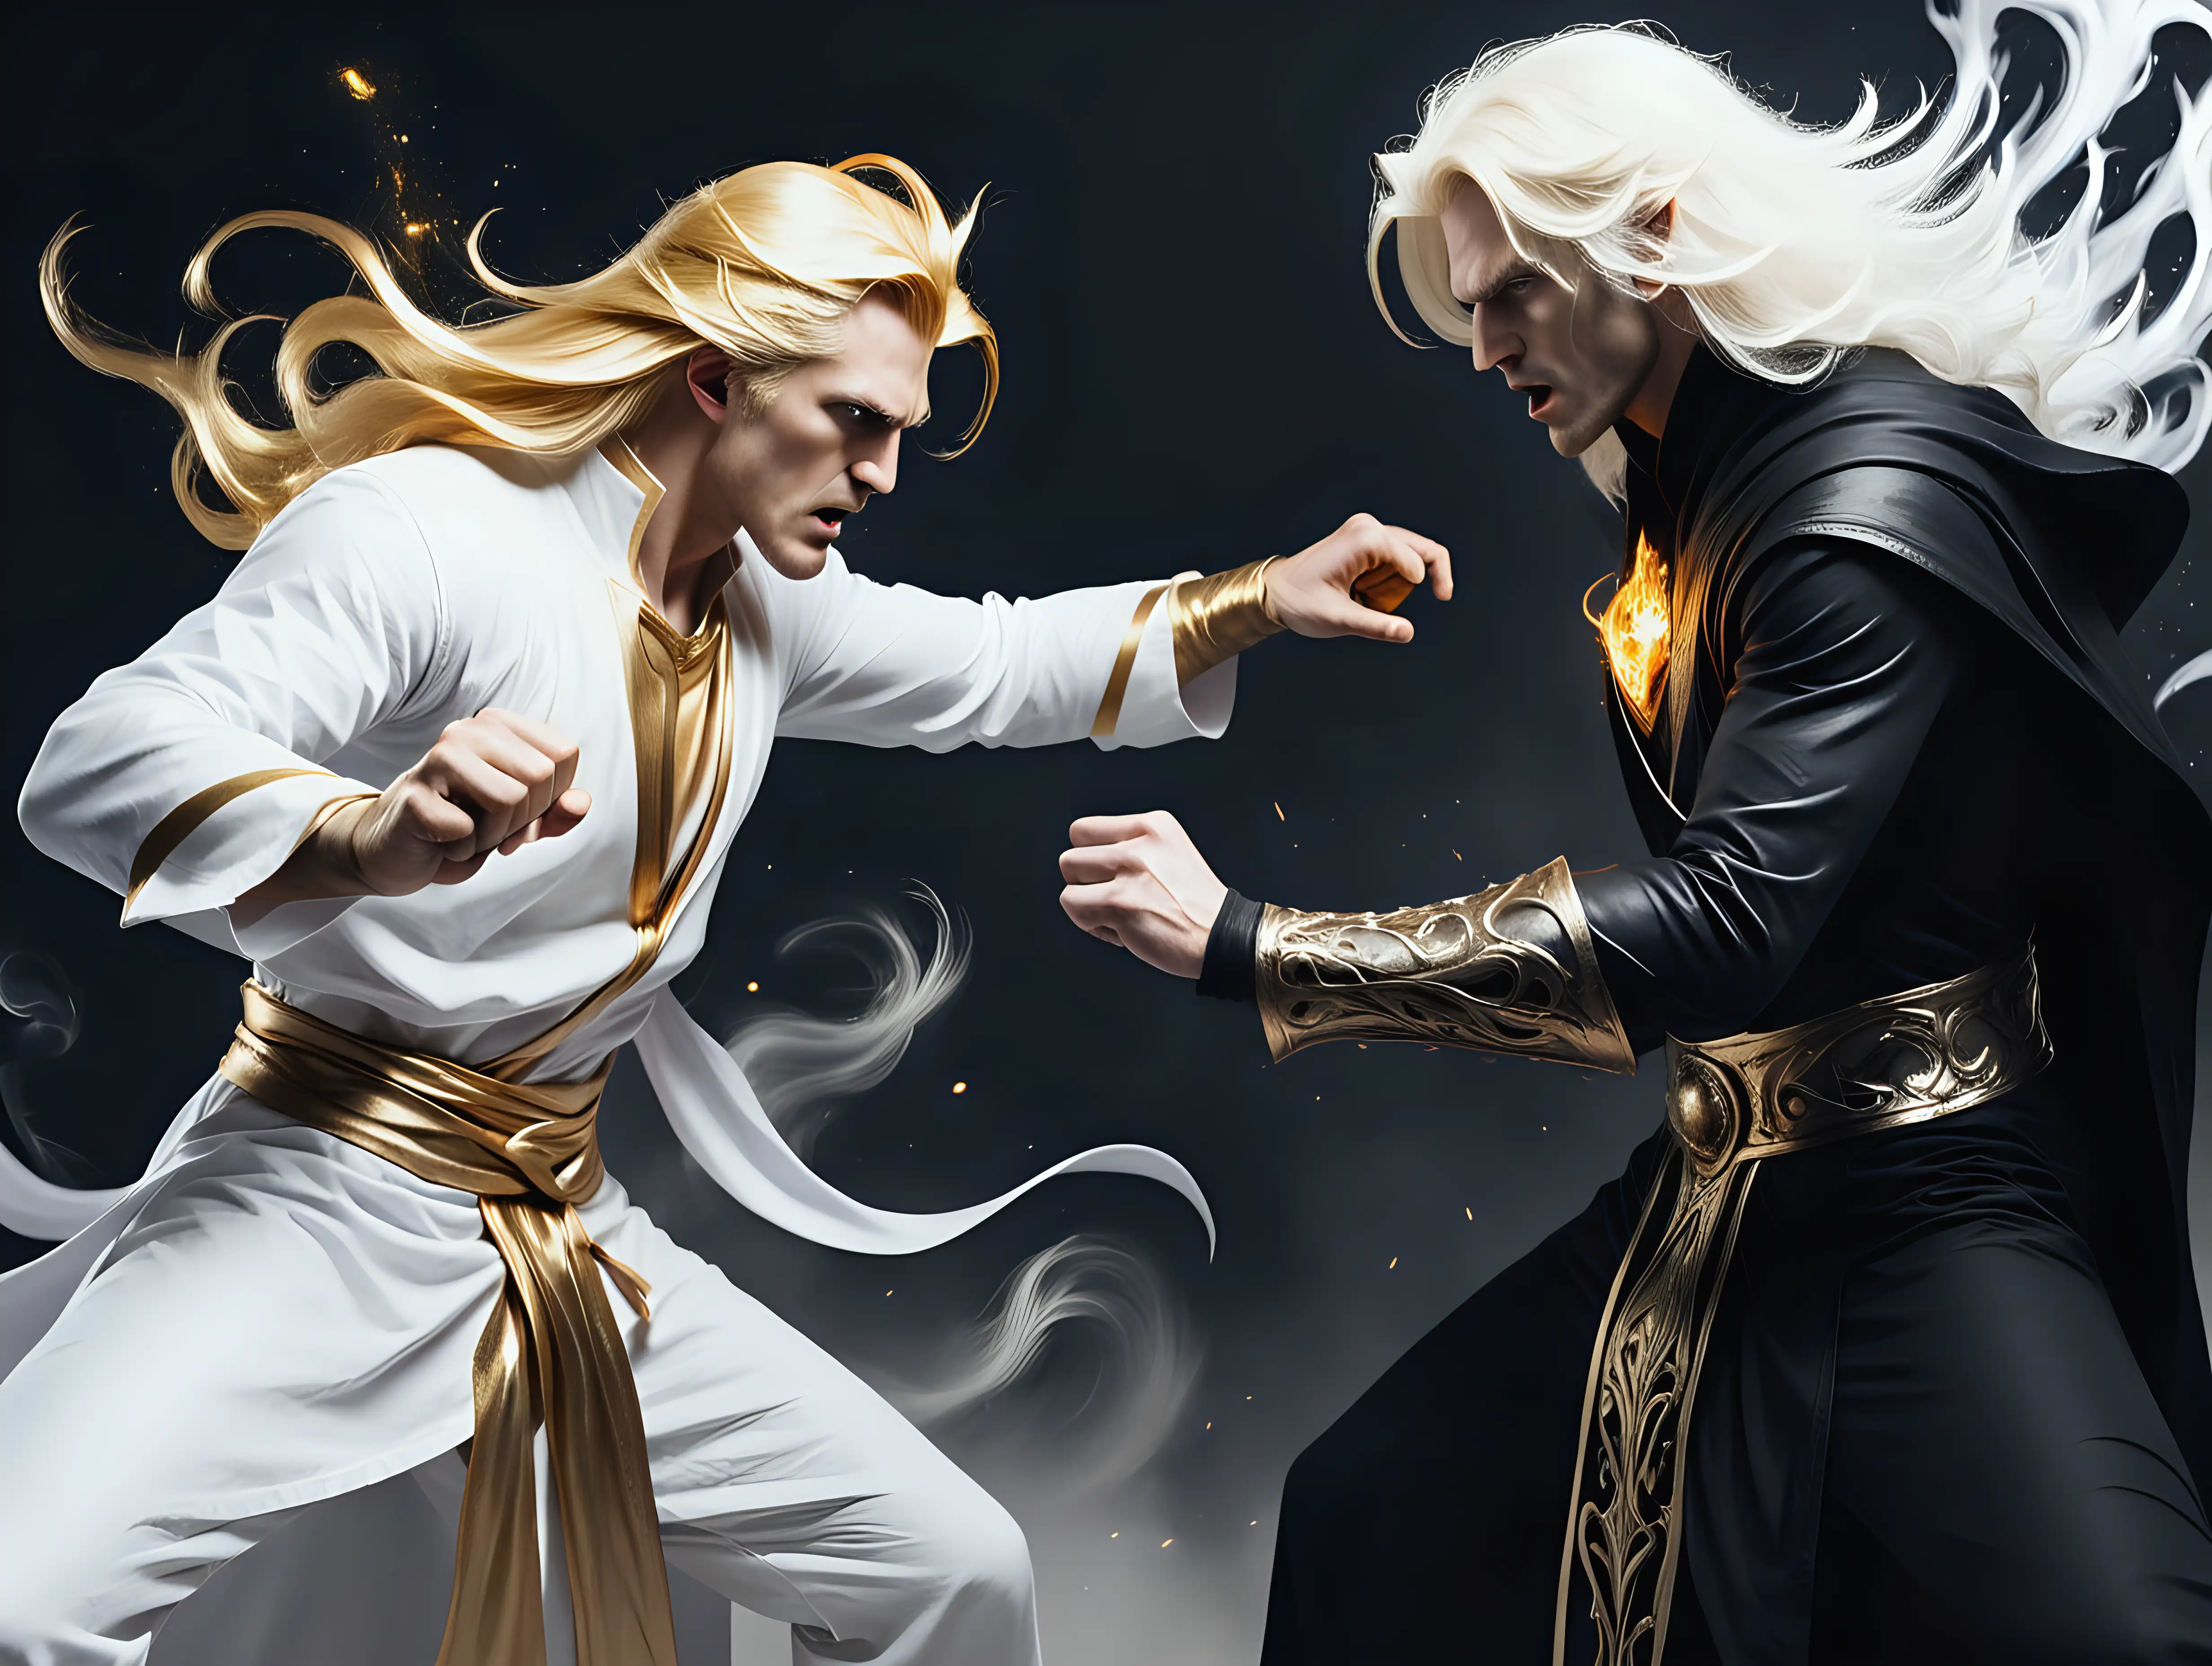 A male sorcerer with golden hair in white clothes fights against a male sorcerer with white hair in black clothes